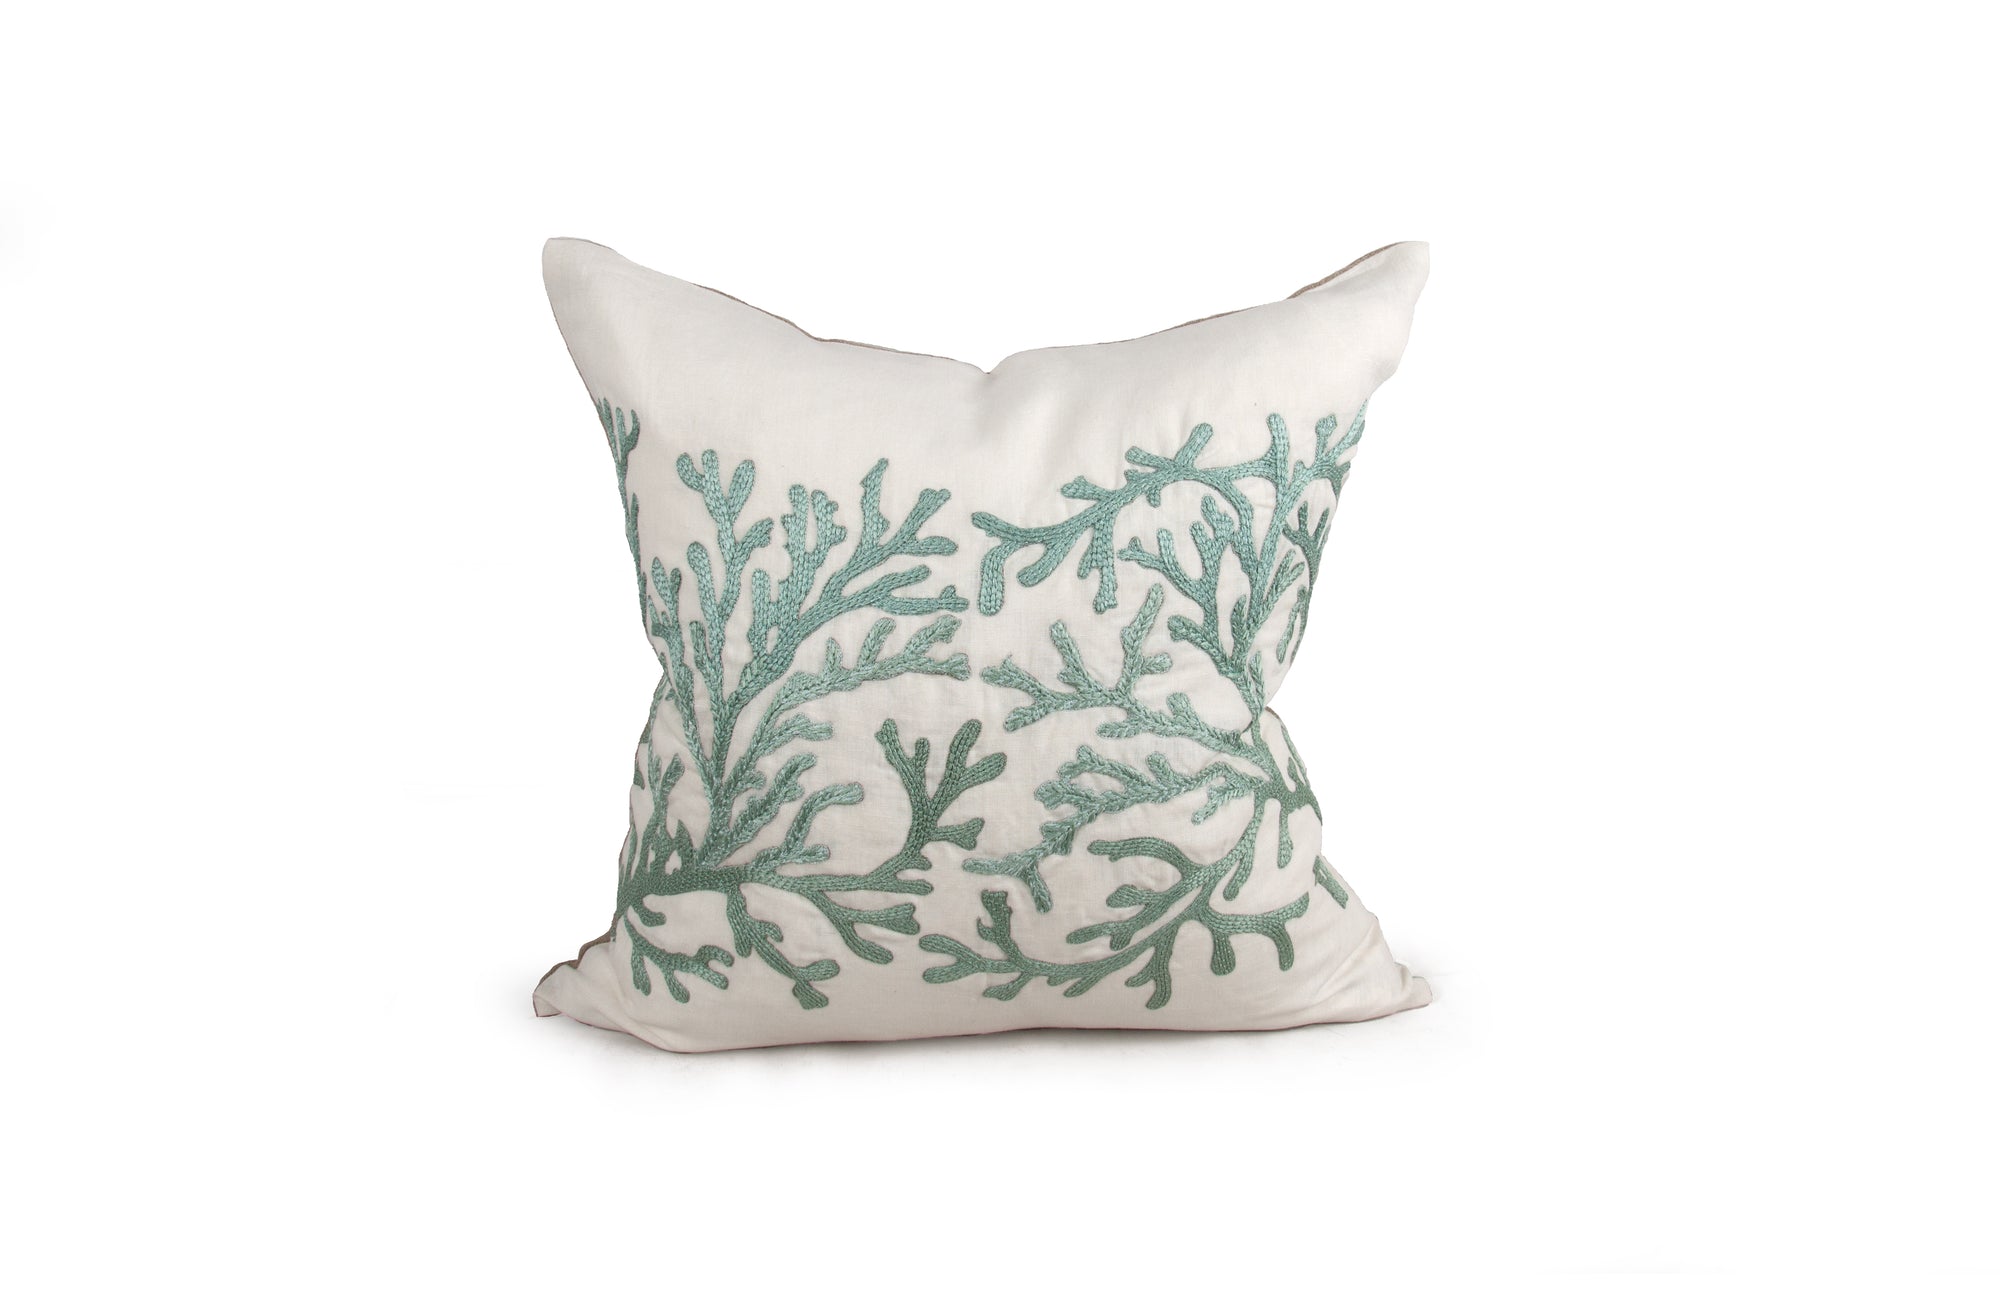 Coral Pillow - Ivory & Ocean Blue